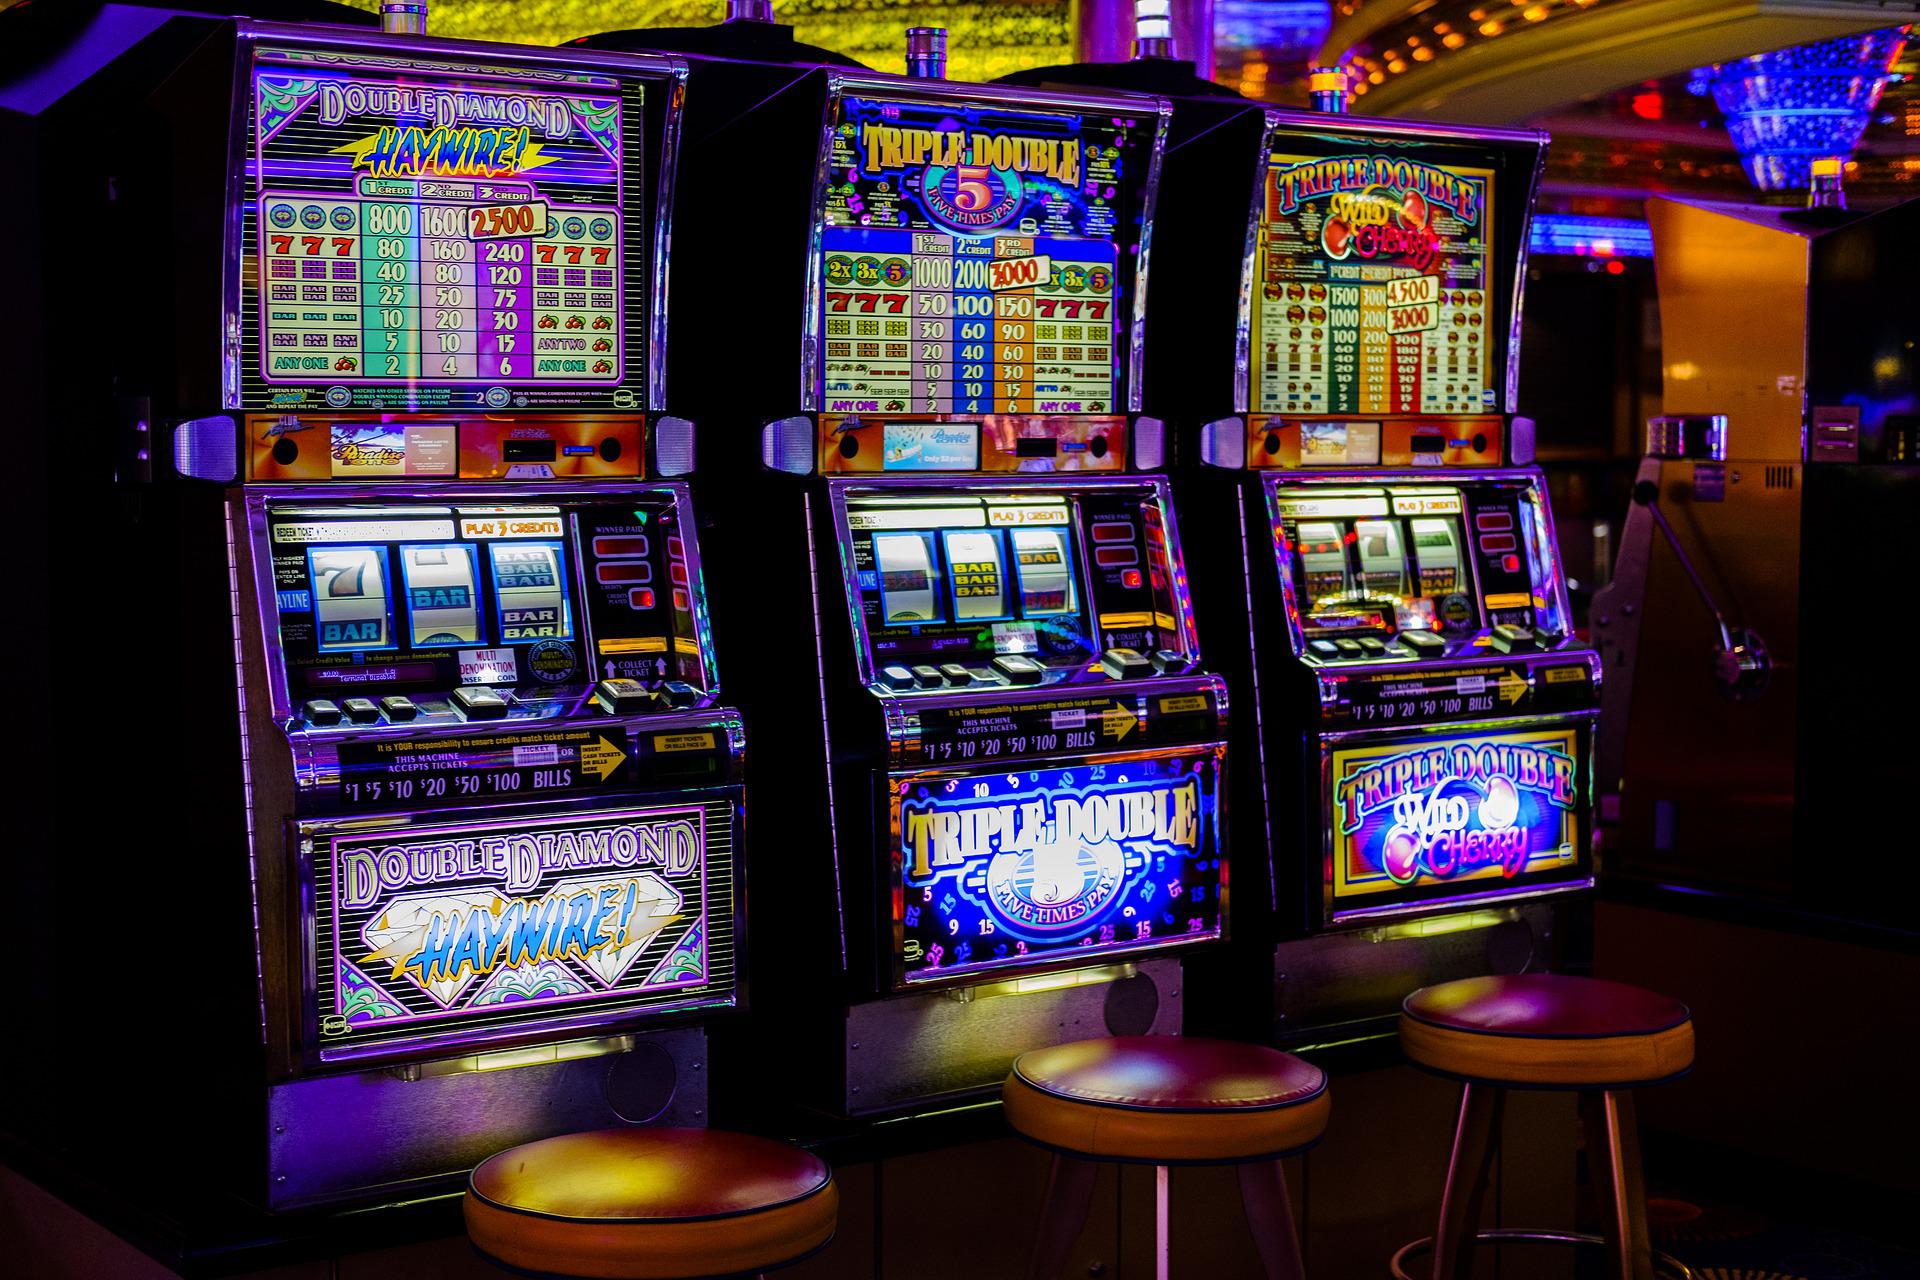 How to win at online slots